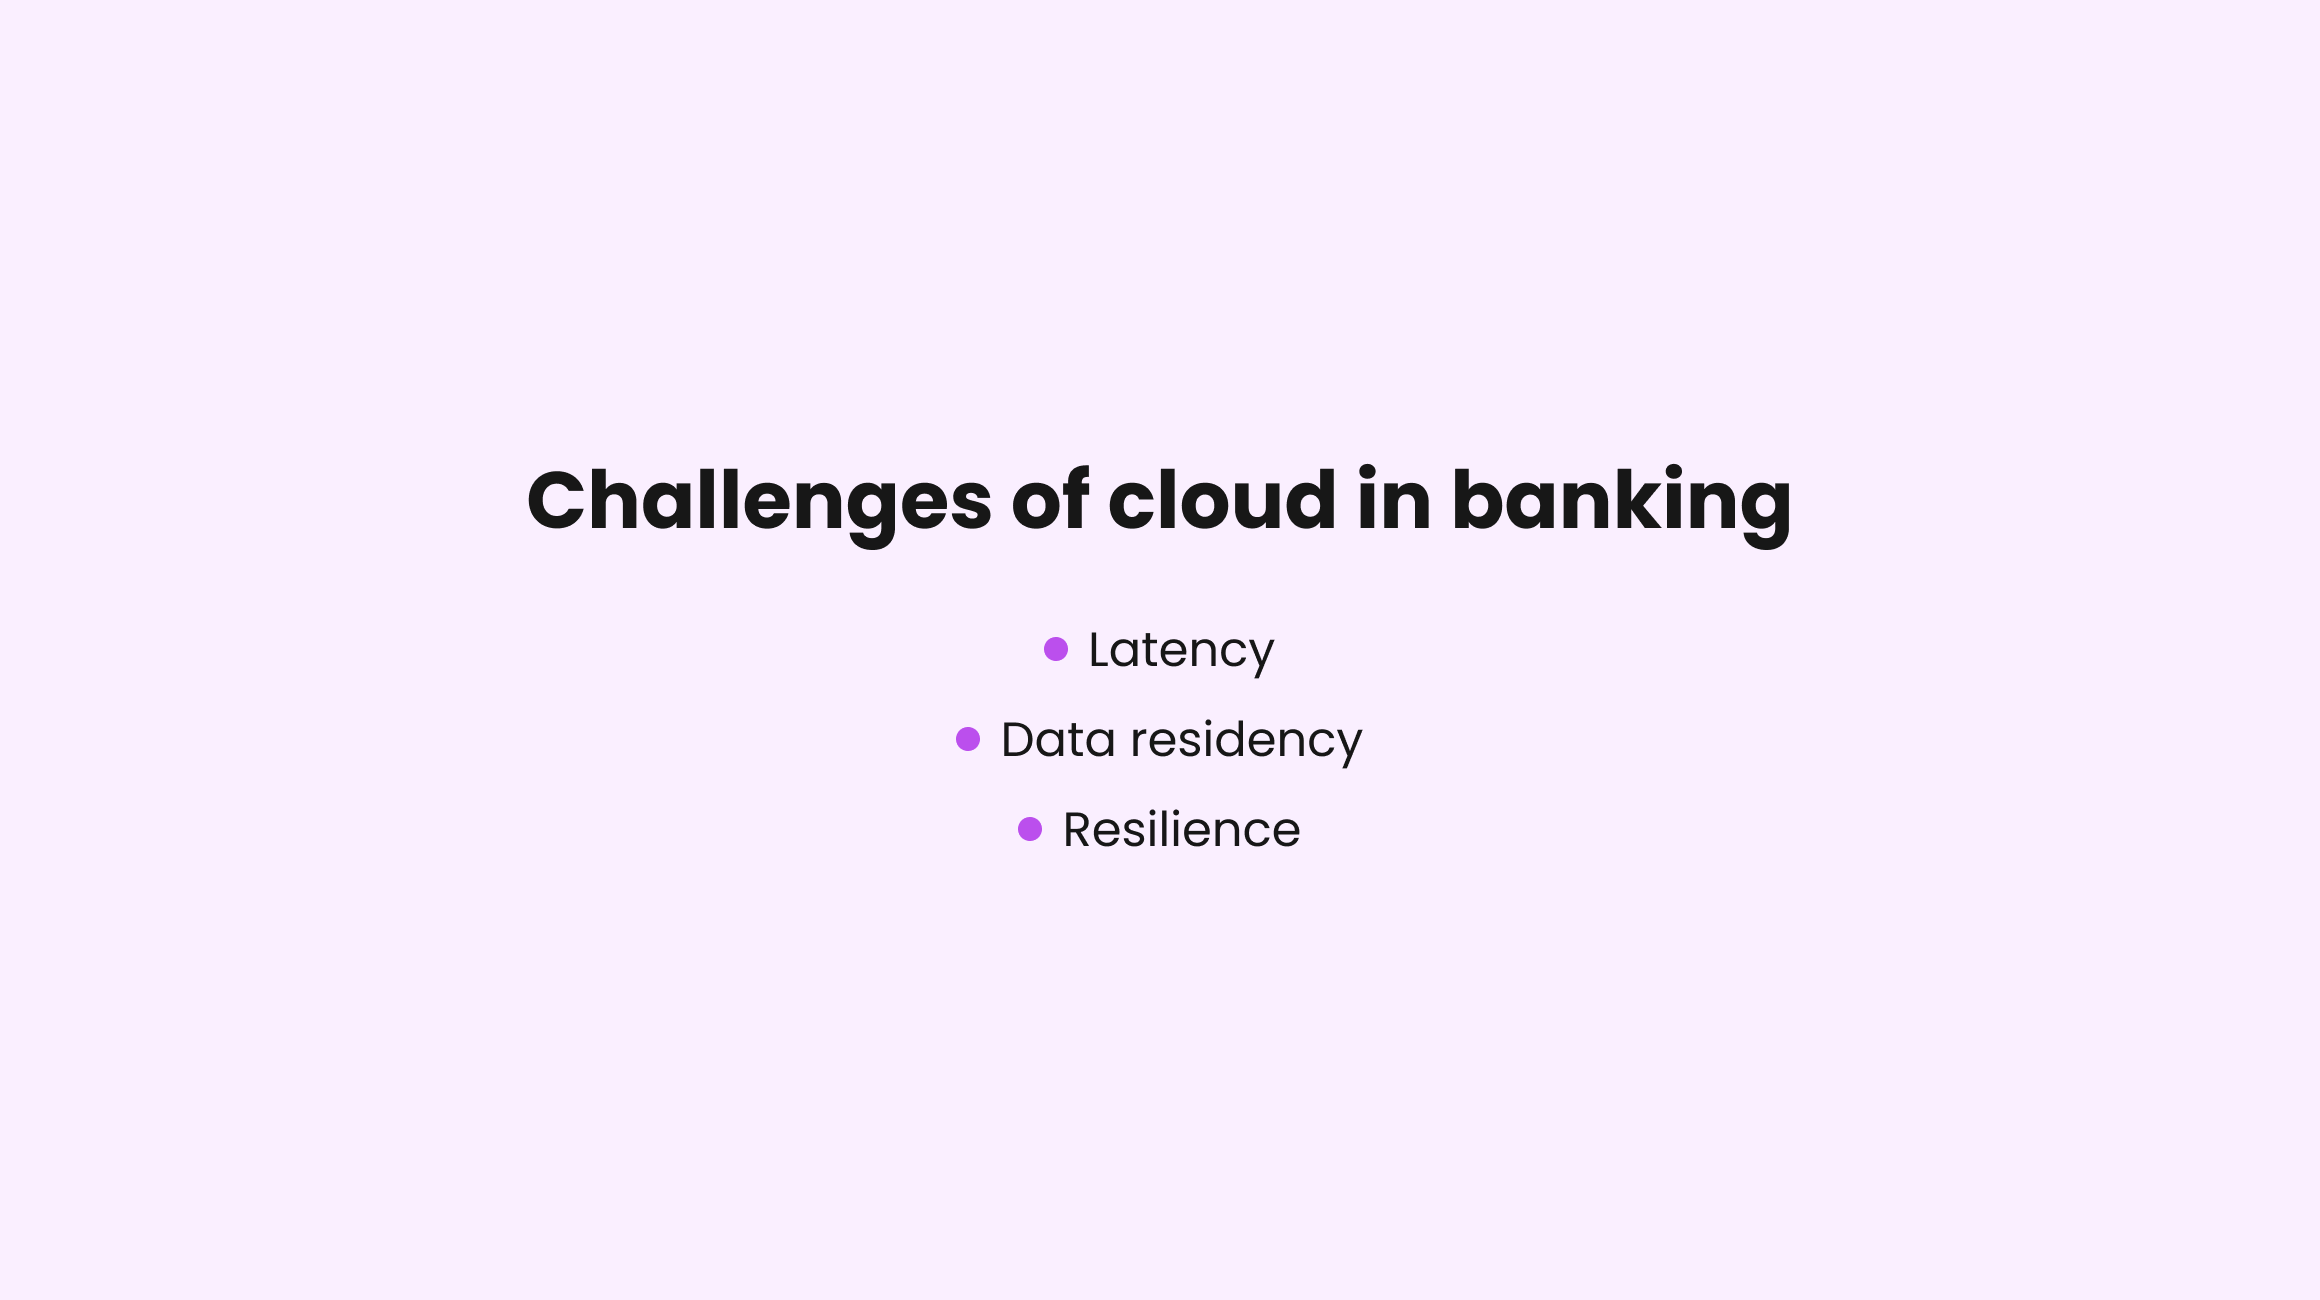 Challenges of cloud computing in banking sector